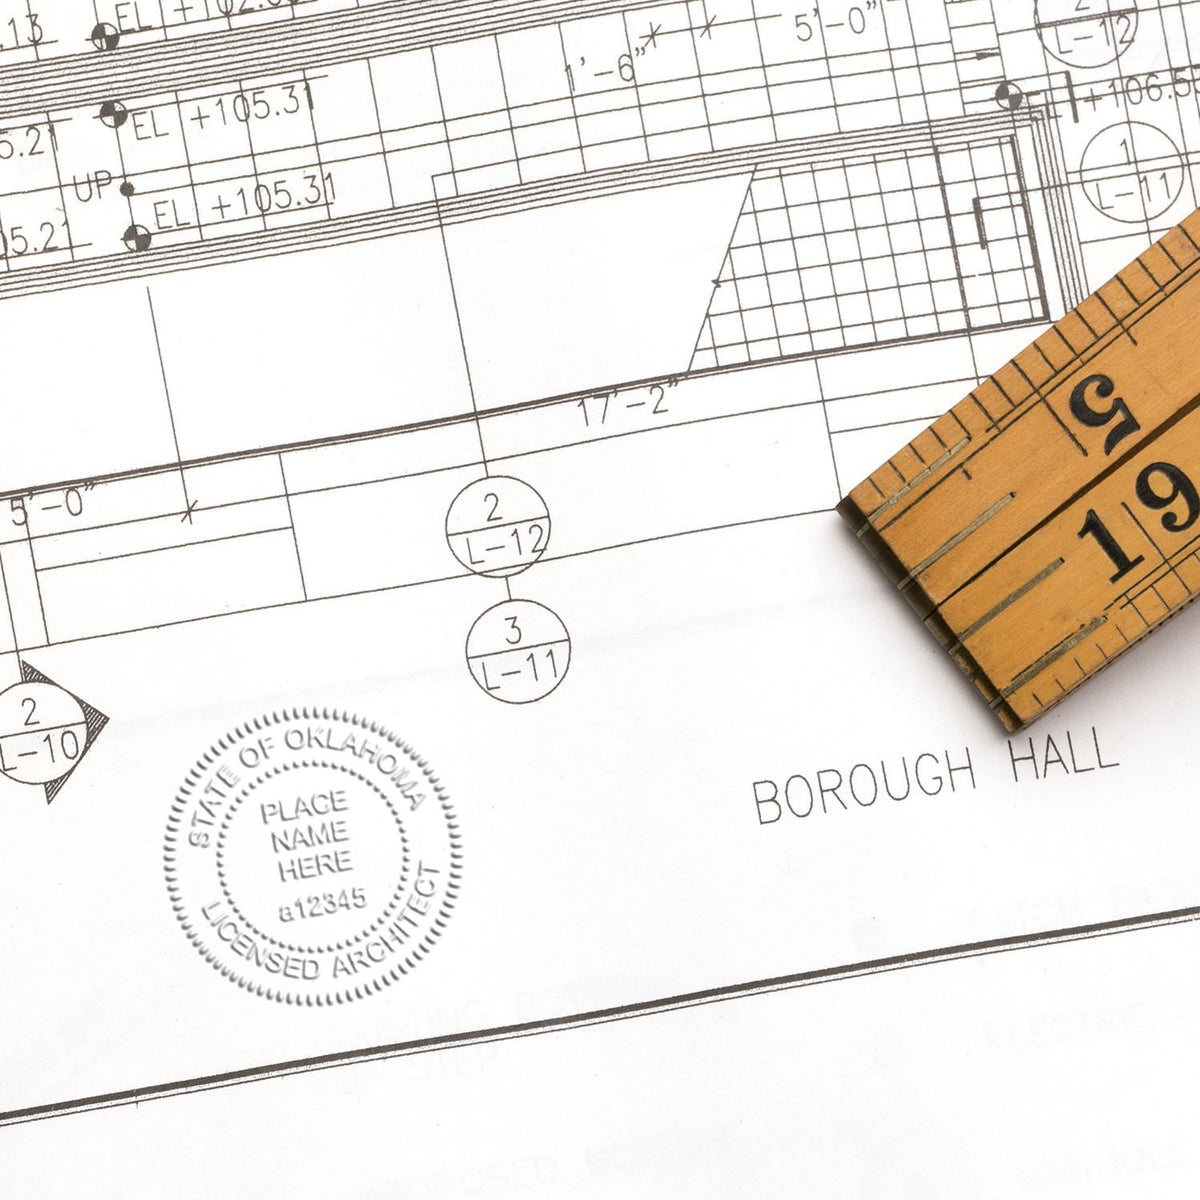 The Extended Long Reach Oklahoma Architect Seal Embosser stamp impression comes to life with a crisp, detailed photo on paper - showcasing true professional quality.